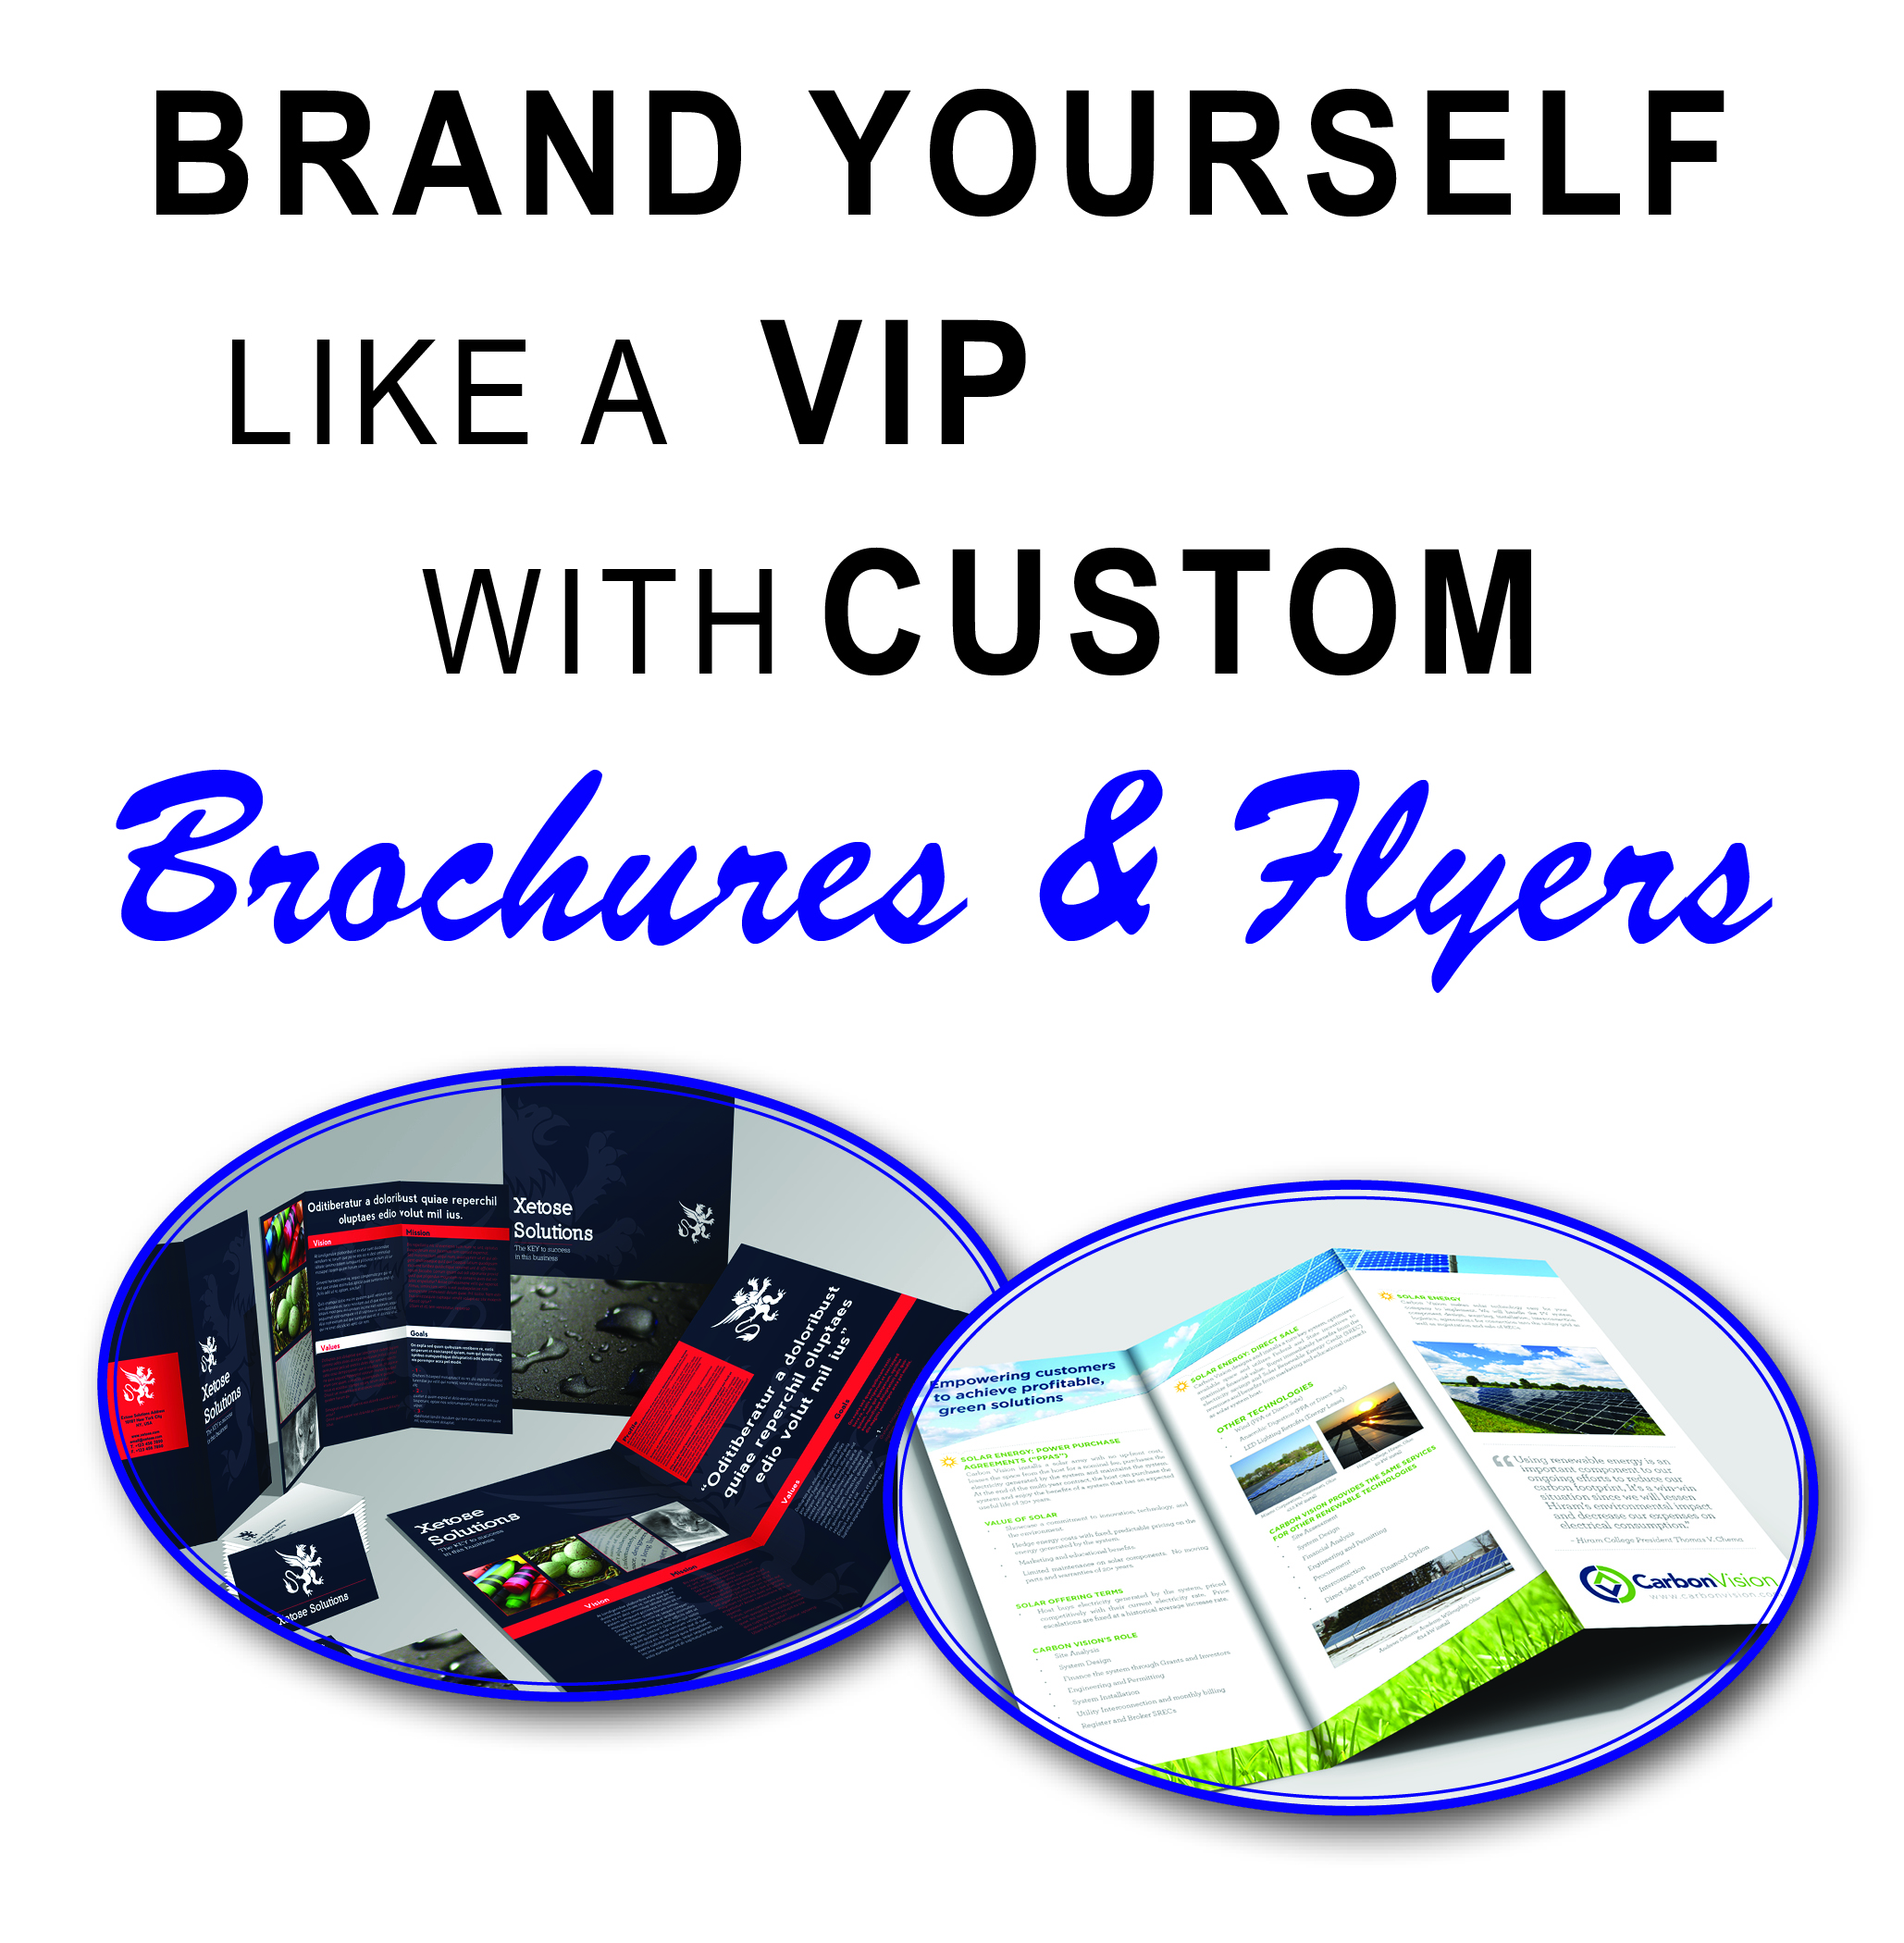 Brochures & Flyers | Full Color Brochures & Flyers - Max Printing and Copy